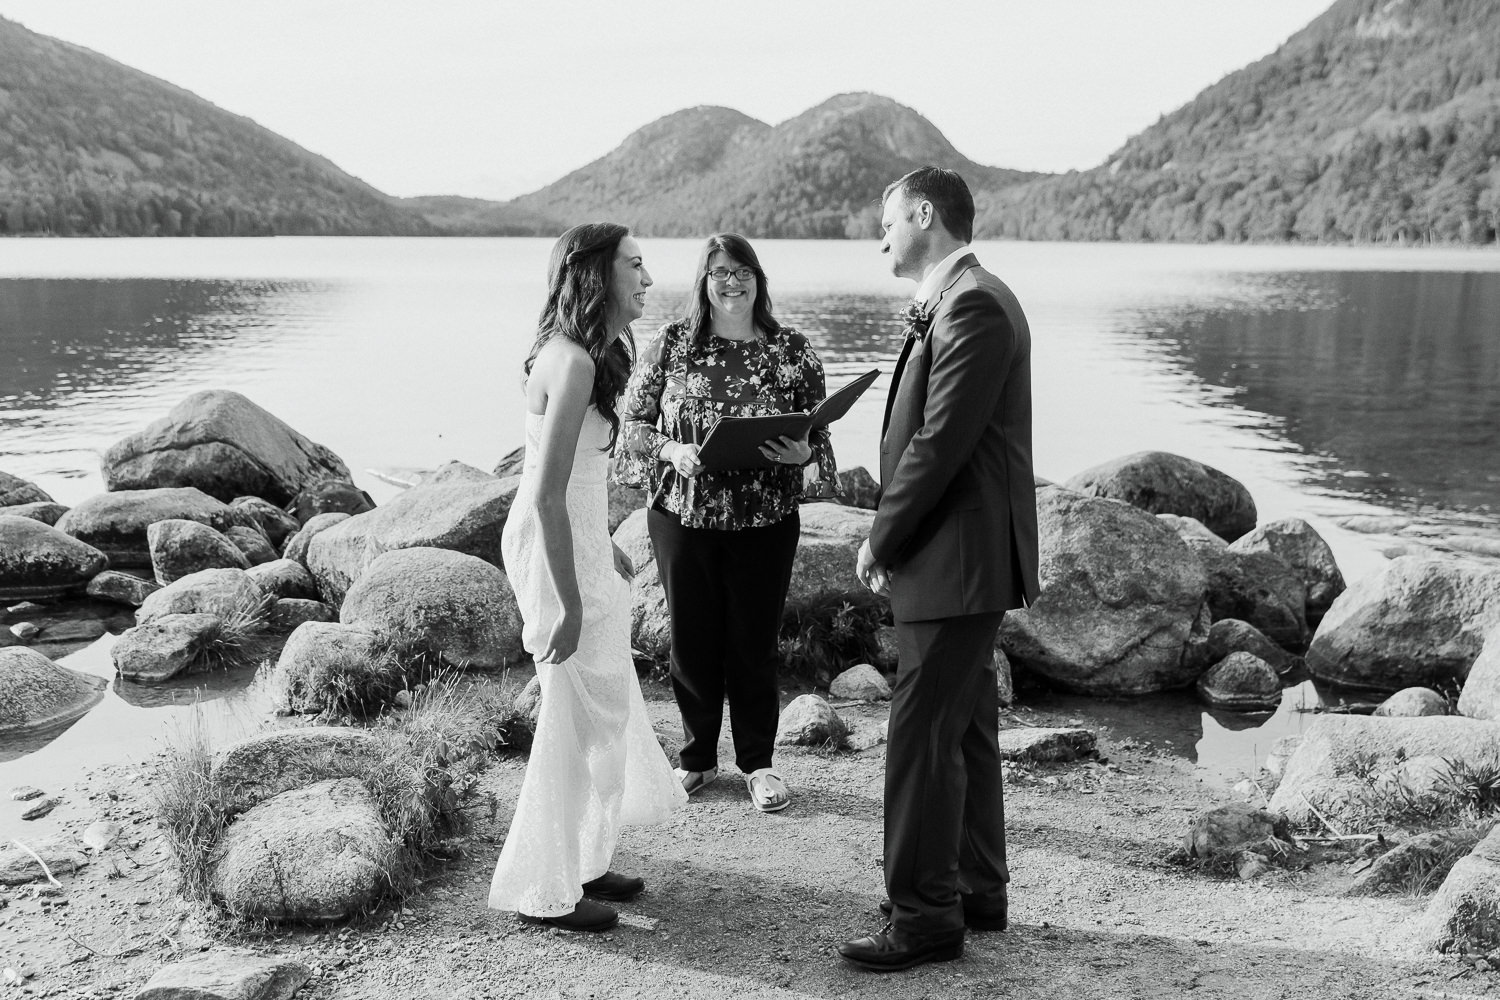 A couple ties the knot in Acadia National Park.